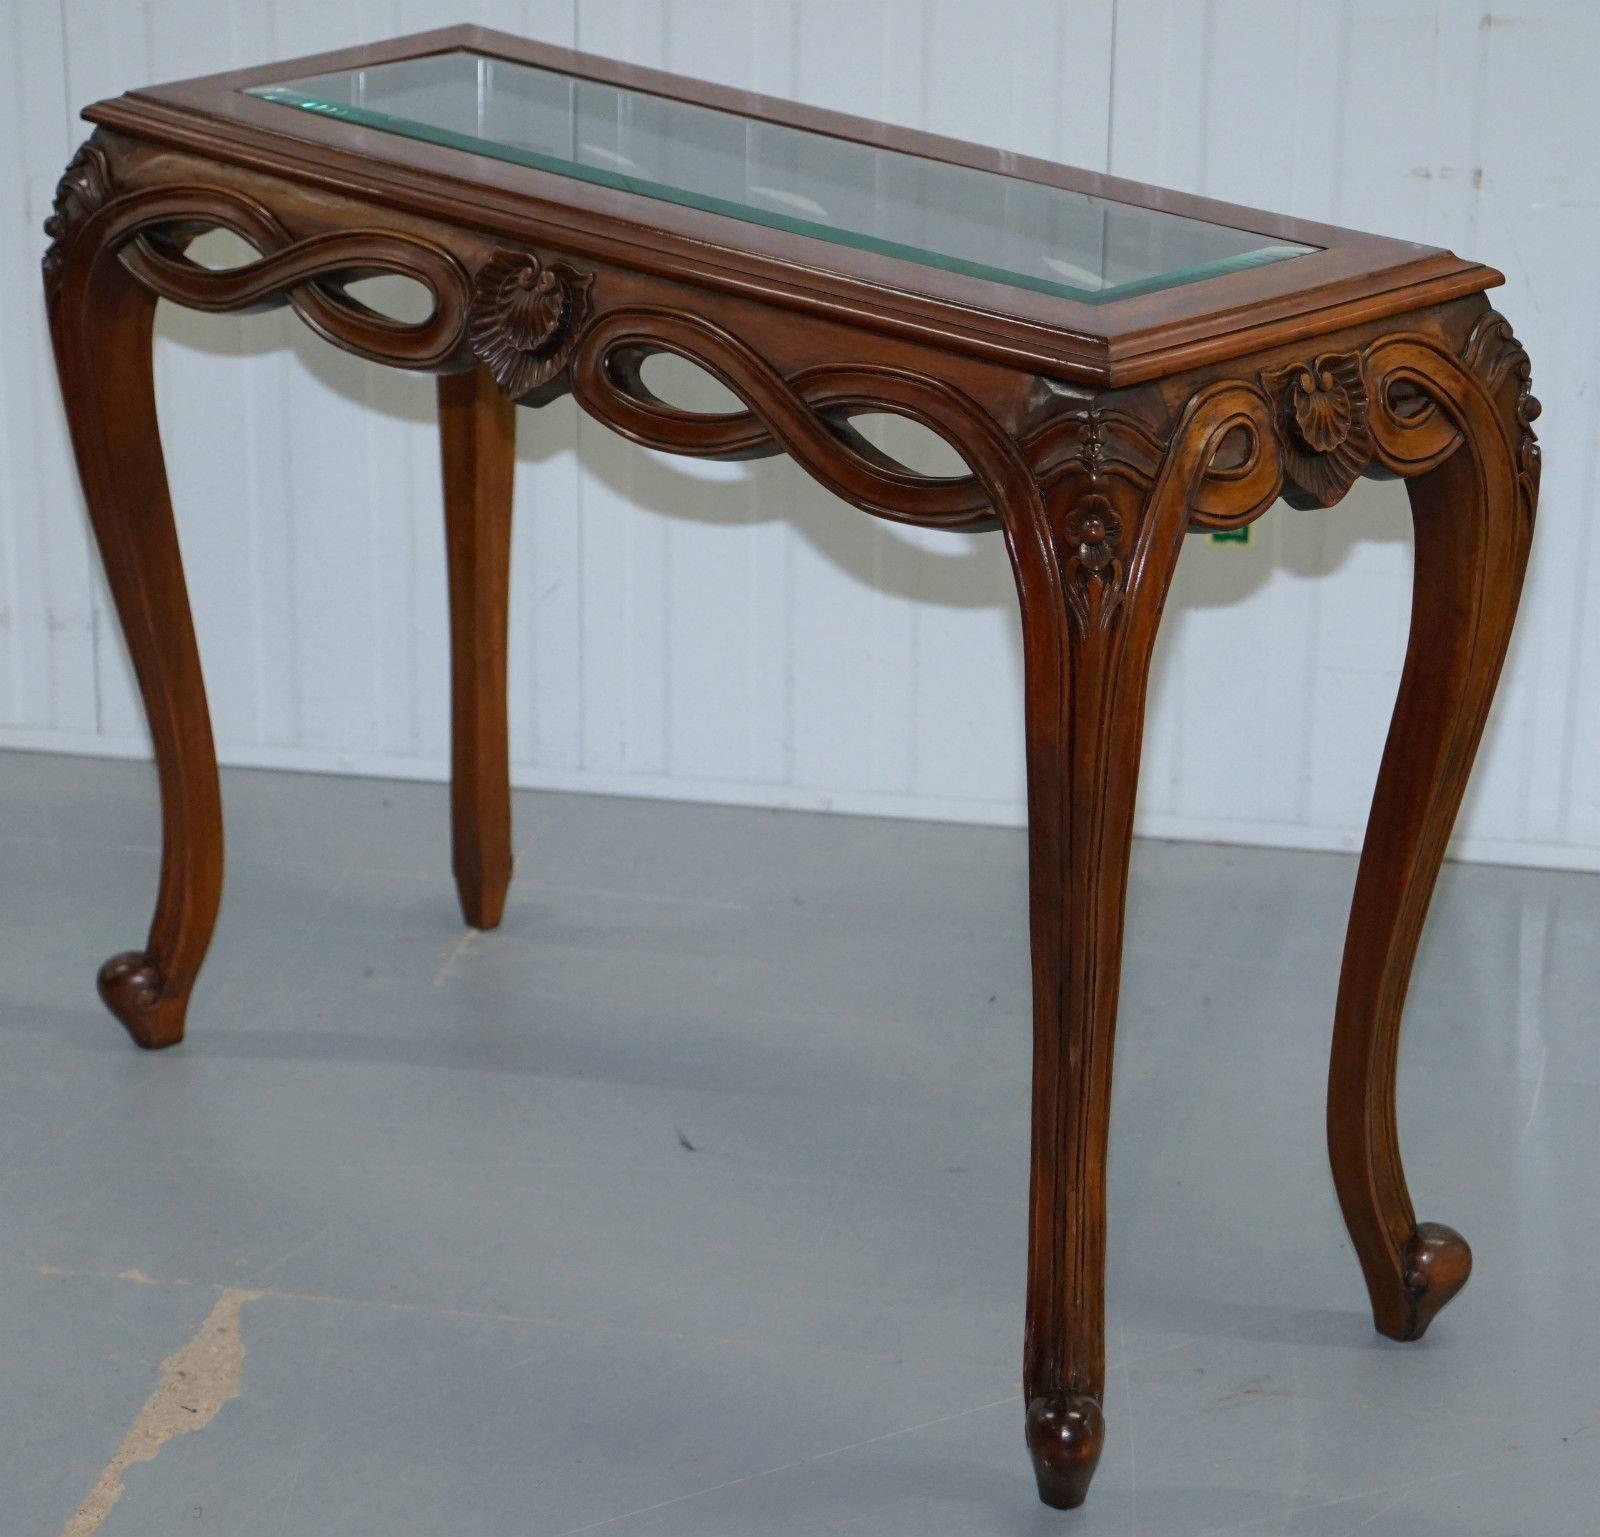 We are delighted to offer for sale this absolutely stunning long cabriole legged solid mahogany console table with beveled glass top

A really very good looking piece in pretty much retail new perfect condition throughout

We have cleaned waxed